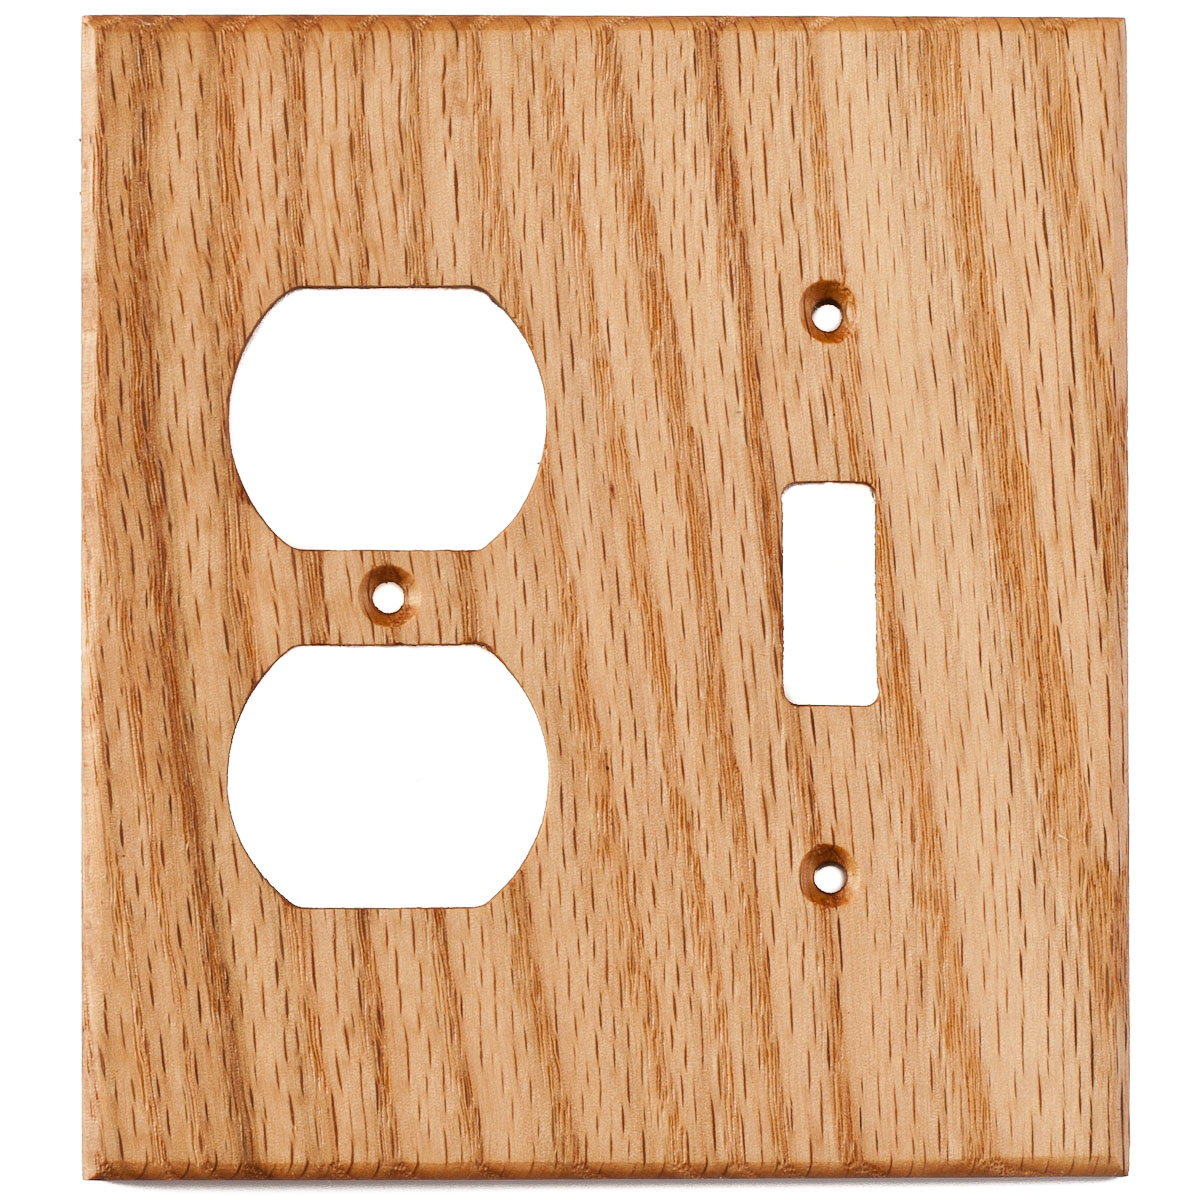 Oak Wood Wall Plate - 2 Gang Combo - Light Switch, Duplex Outlet Cover